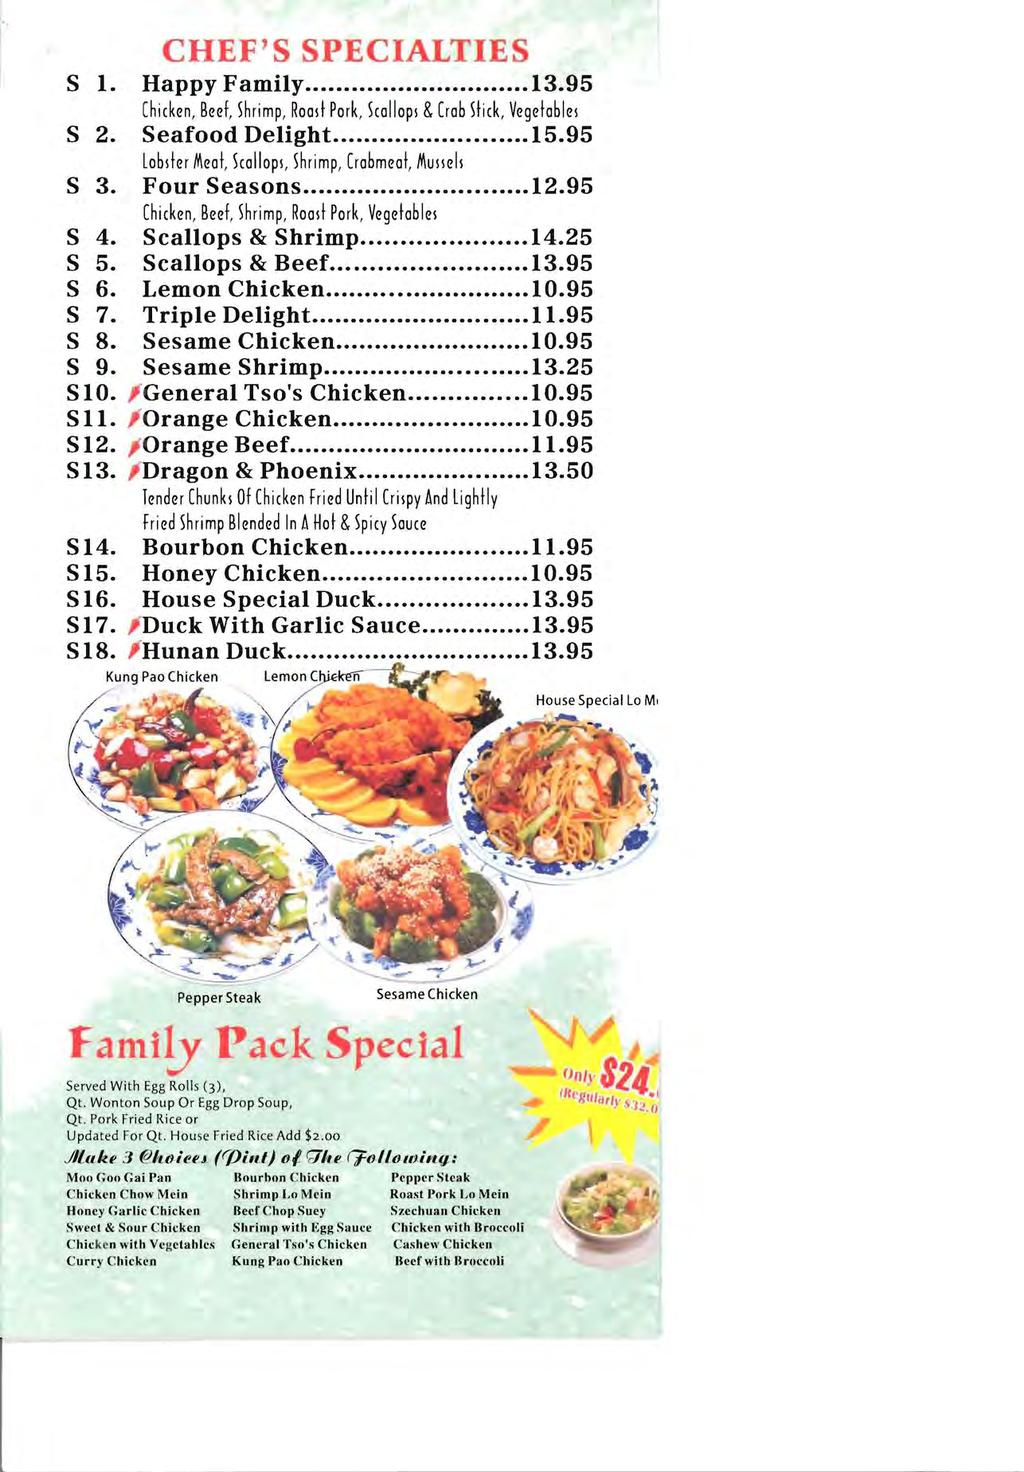 CHEF'S SPECALTES S 1. Happy Family.13.95 Chicken, Beef, hrimp, Road Pork, callops &Crab tick, Vegetables S 2. Seafood Delight.15.95 lobder Meat, callops, hrimp, Crabmeat, Mussels S 3. Four Seasons.12.